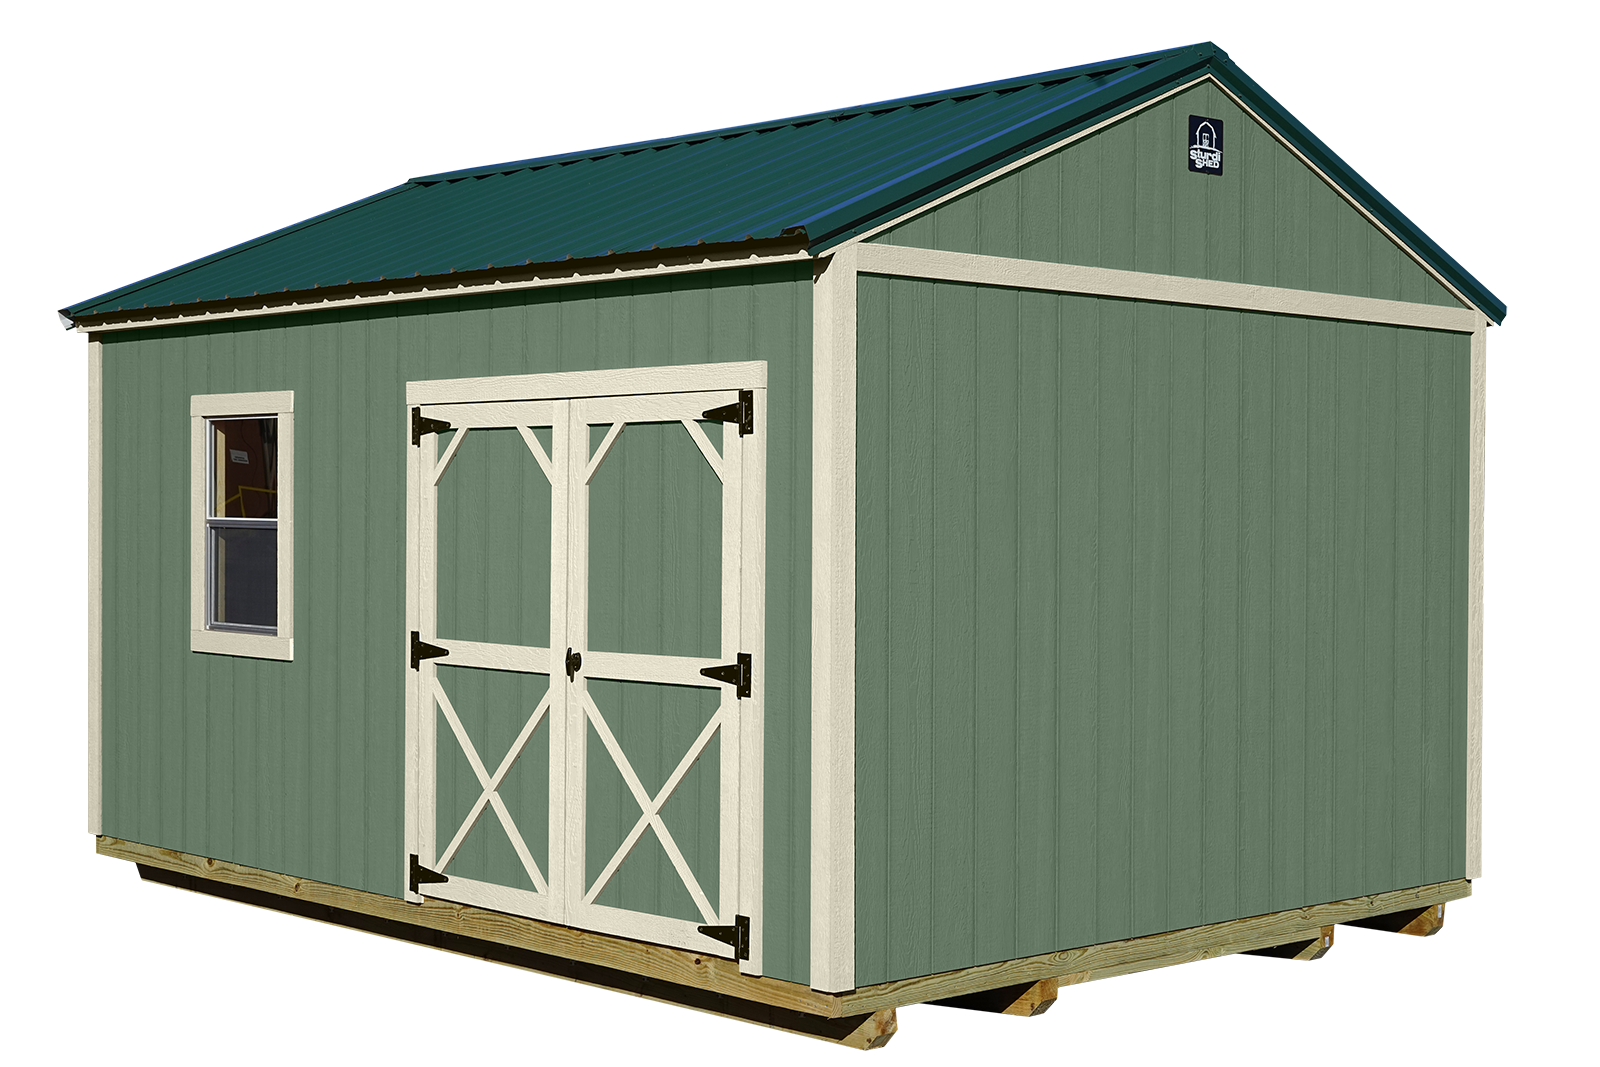 Make Use of a Storage Shed Workshop for Impeccable Potting and Gardening Needs